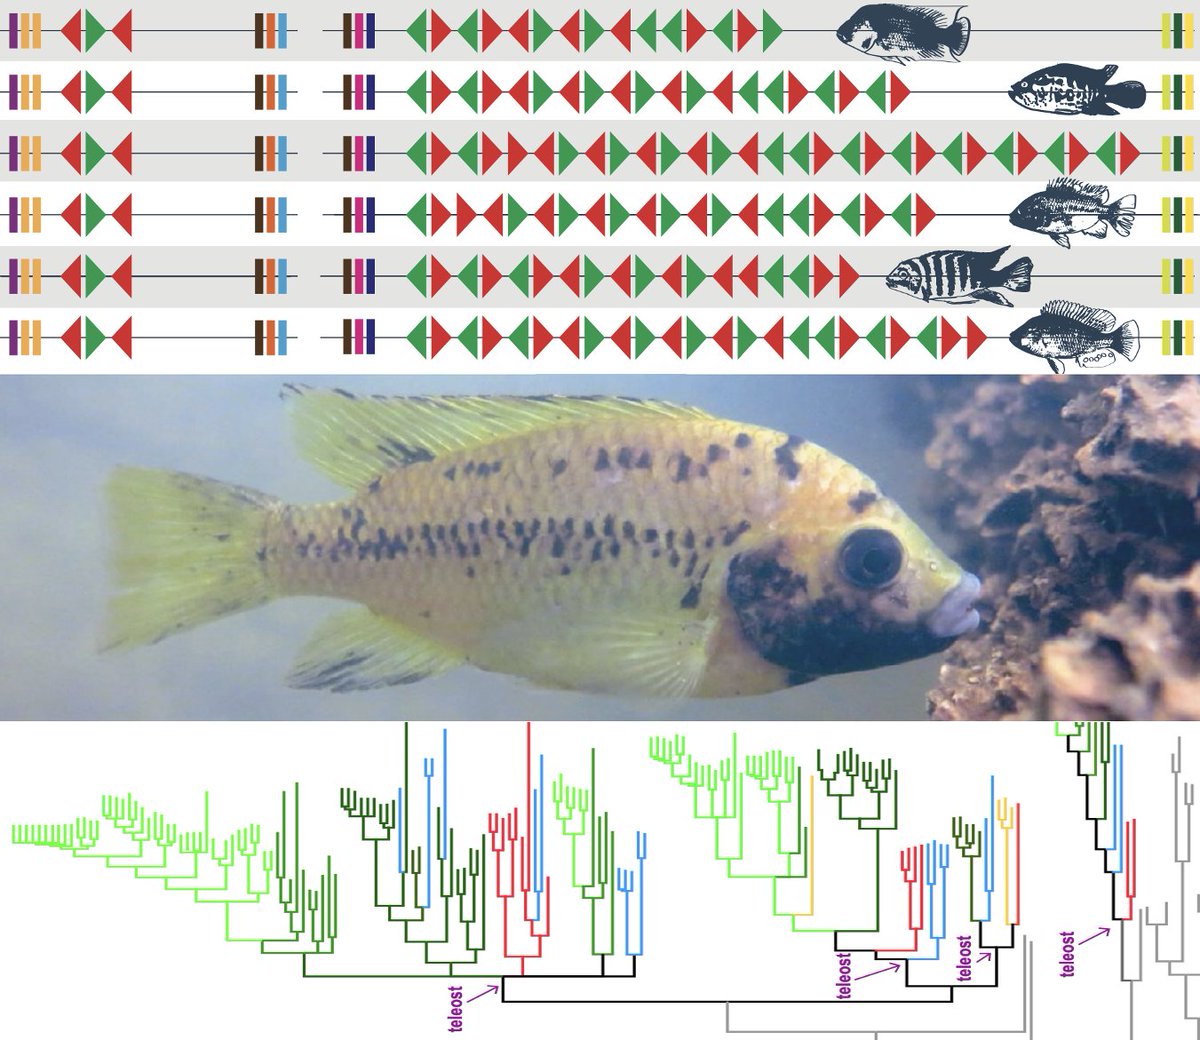 Hemoglobin gene evolution in teleosts and cichlids: fish genomes have many Hb genes (up to 43) diversified from ancestral 7-8 Hb copies. Our new preprint & 1st step towards #hemoglobin function in Barombi #cichlids for @solovey_omen. Thks to all coauthors! biorxiv.org/content/10.110…